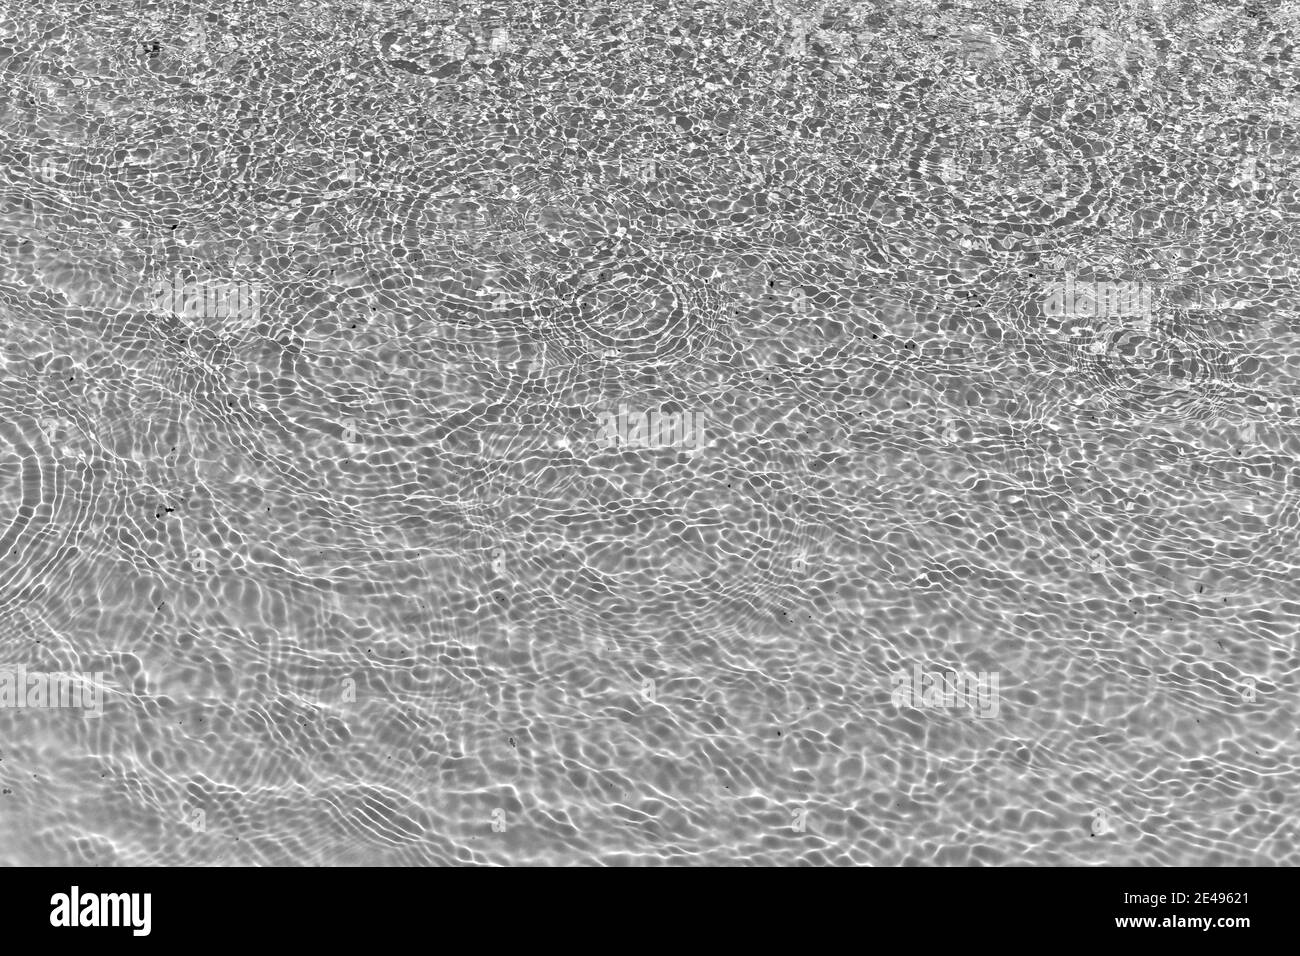 Clear water with ripples. Background abstract monochrome image. Stock Photo